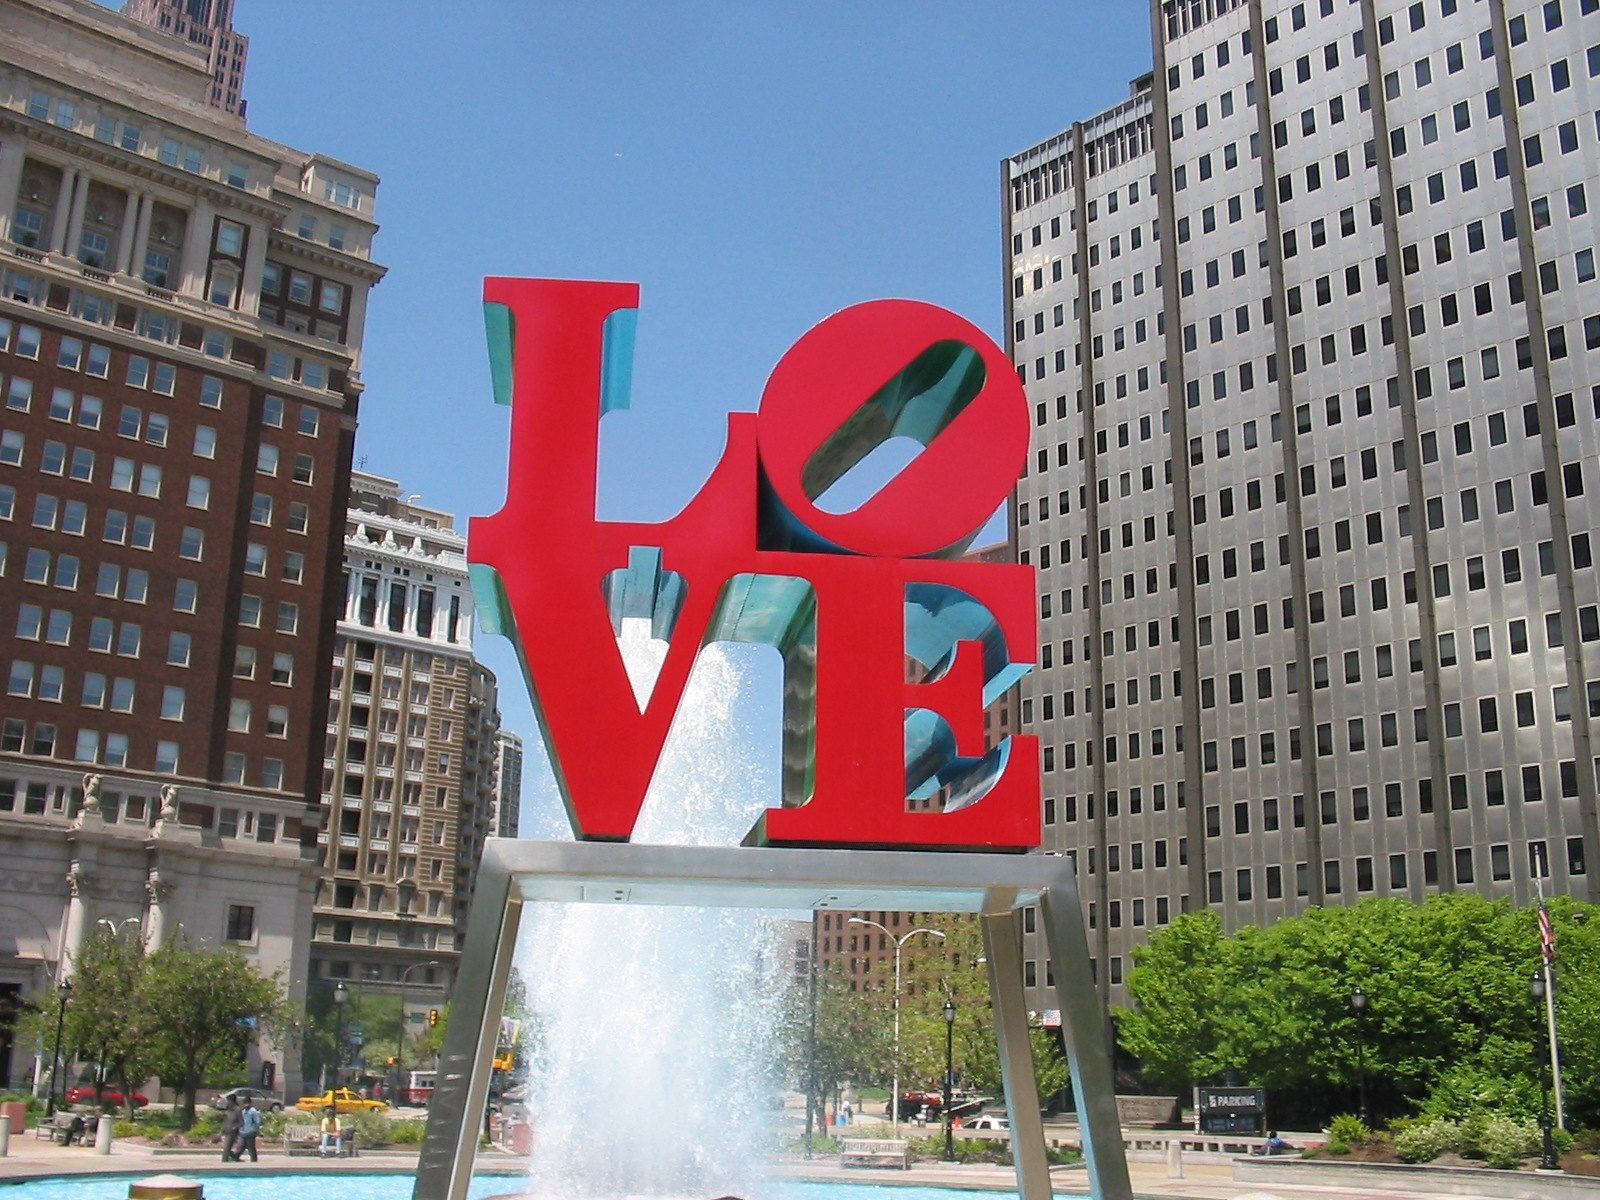 LOVE statue in LOVE Park, officially known as John F. Kennedy Plaza